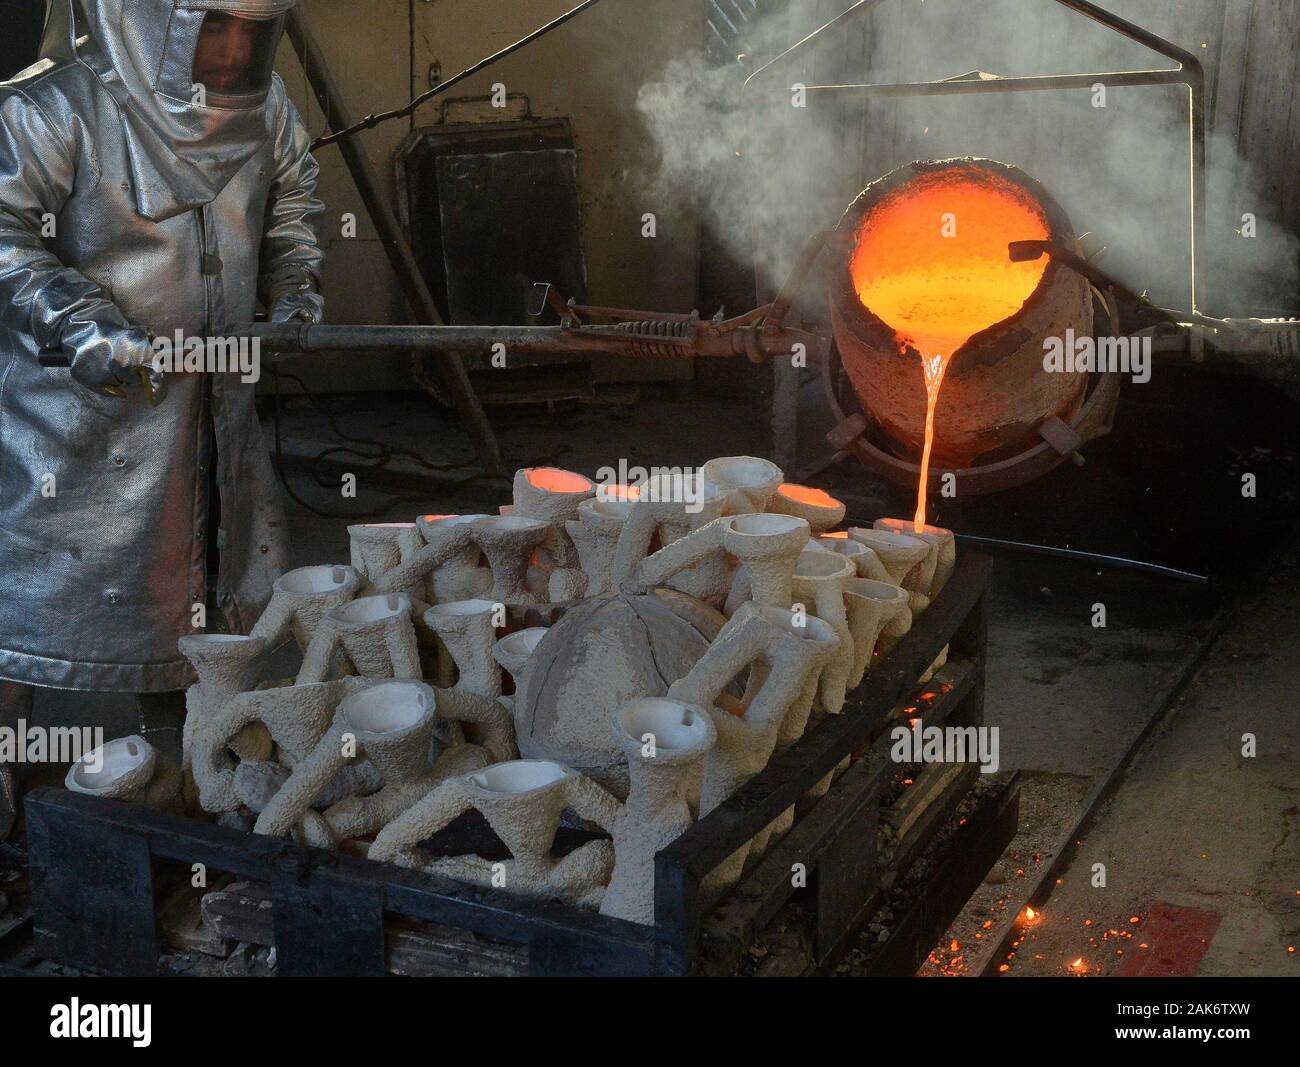 Workers in fire suits pour molten bronze metal into molds during the casting of the Screen Actors Guild Award statuettes at the American Fine Arts Foundry in Burbank, California on Tuesday, January 7, 2020. Winners are to be announced during a live simulcast on TNT and TBS in Los Angeles on January 19, 2020. Photo by Jim Ruymen/UPI Credit: UPI/Alamy Live News Stock Photo